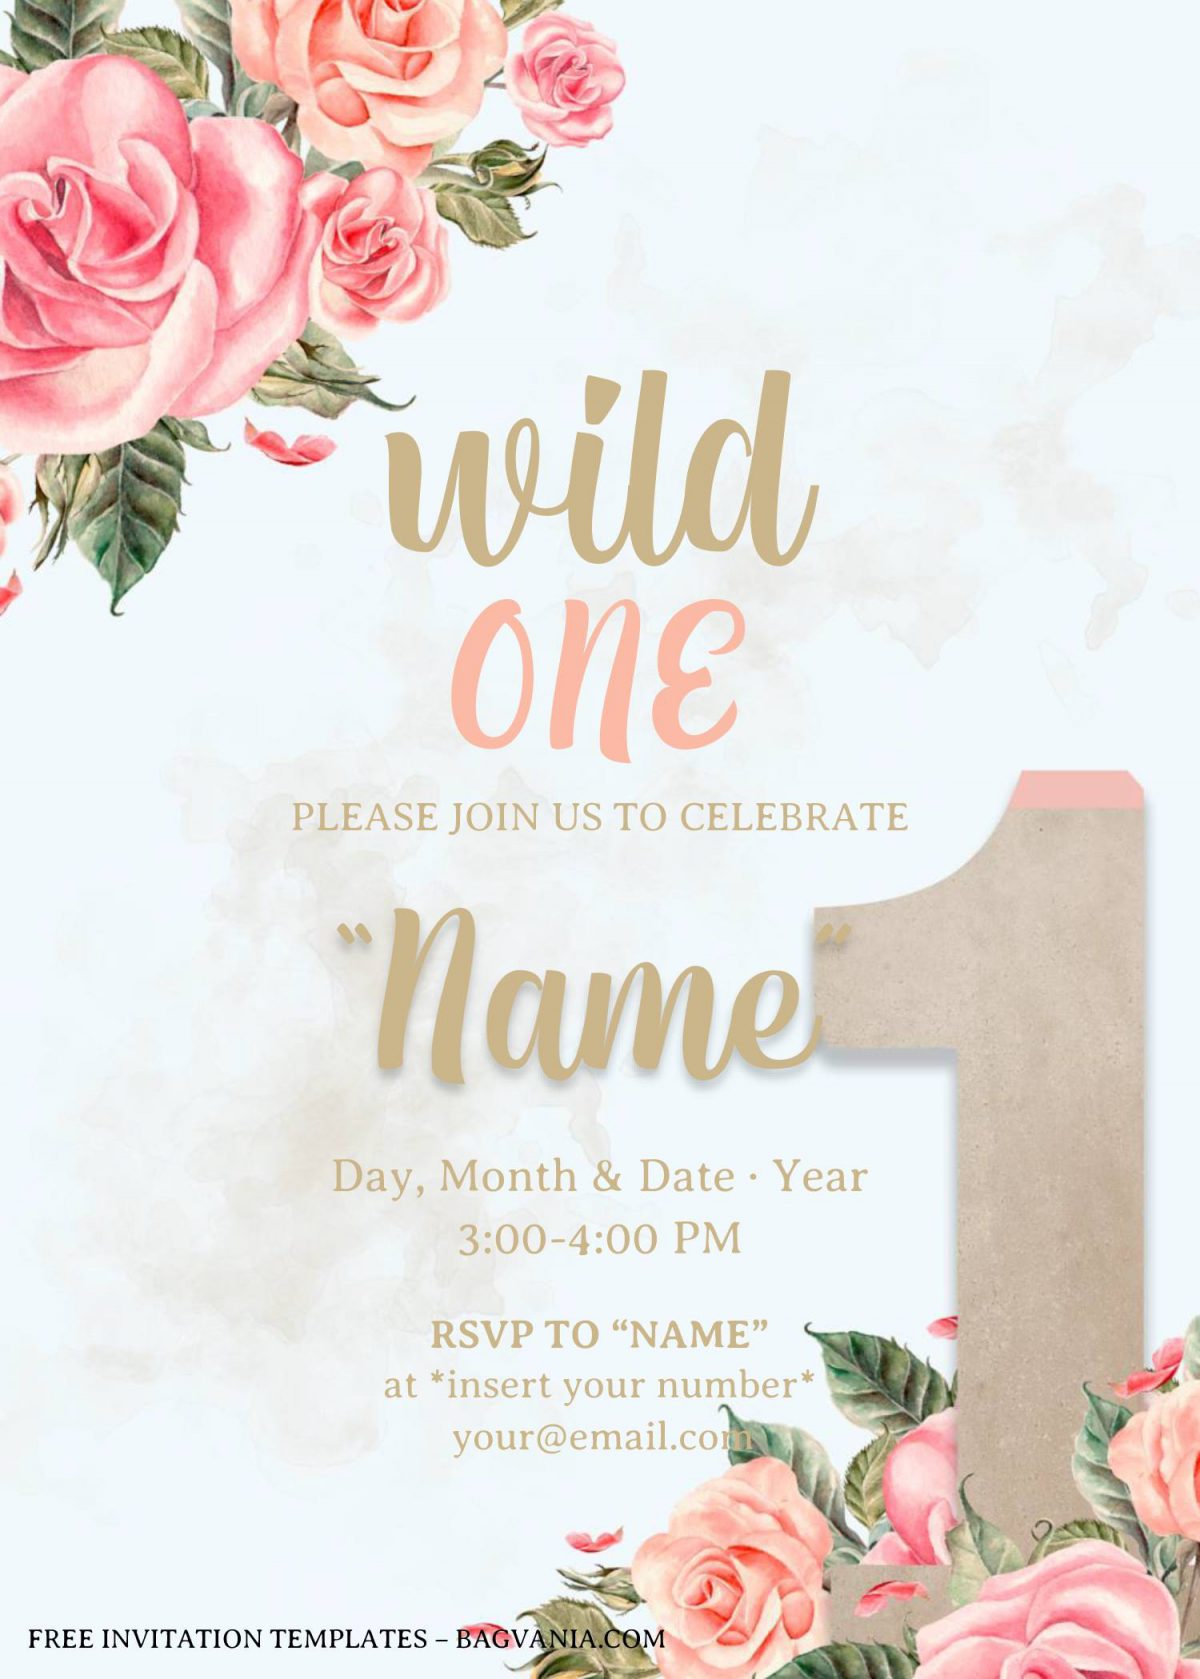 Free Wild One Baby Shower Invitation Templates For Word and has portrait design and rustic background